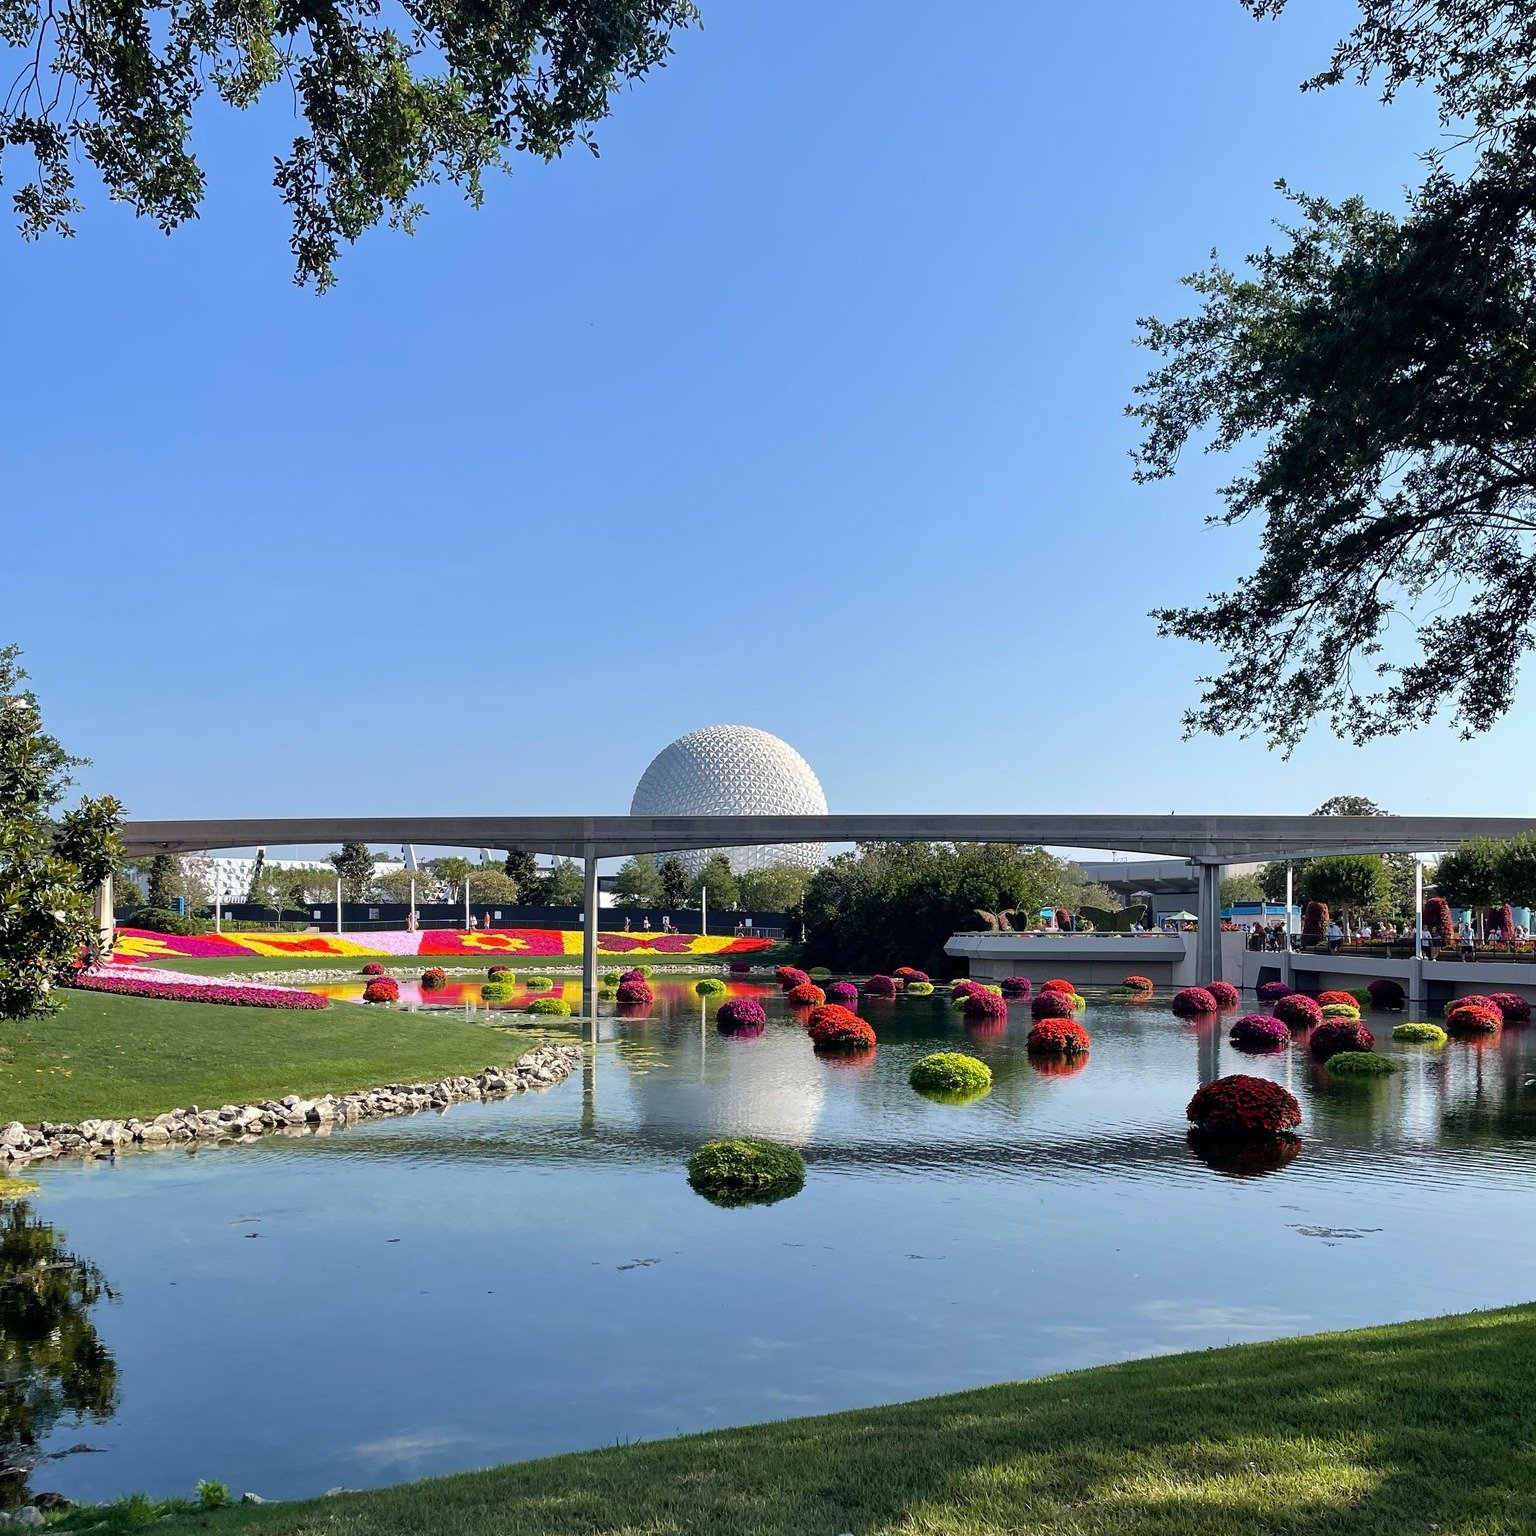 Pro Tip: Arrive at the parks early to beat the crowds and maximize your day. This is extra important during summer, when temperatures can make the middle of the day feel miserable! Take advantage of lower crowds and lower temperatures by starting you